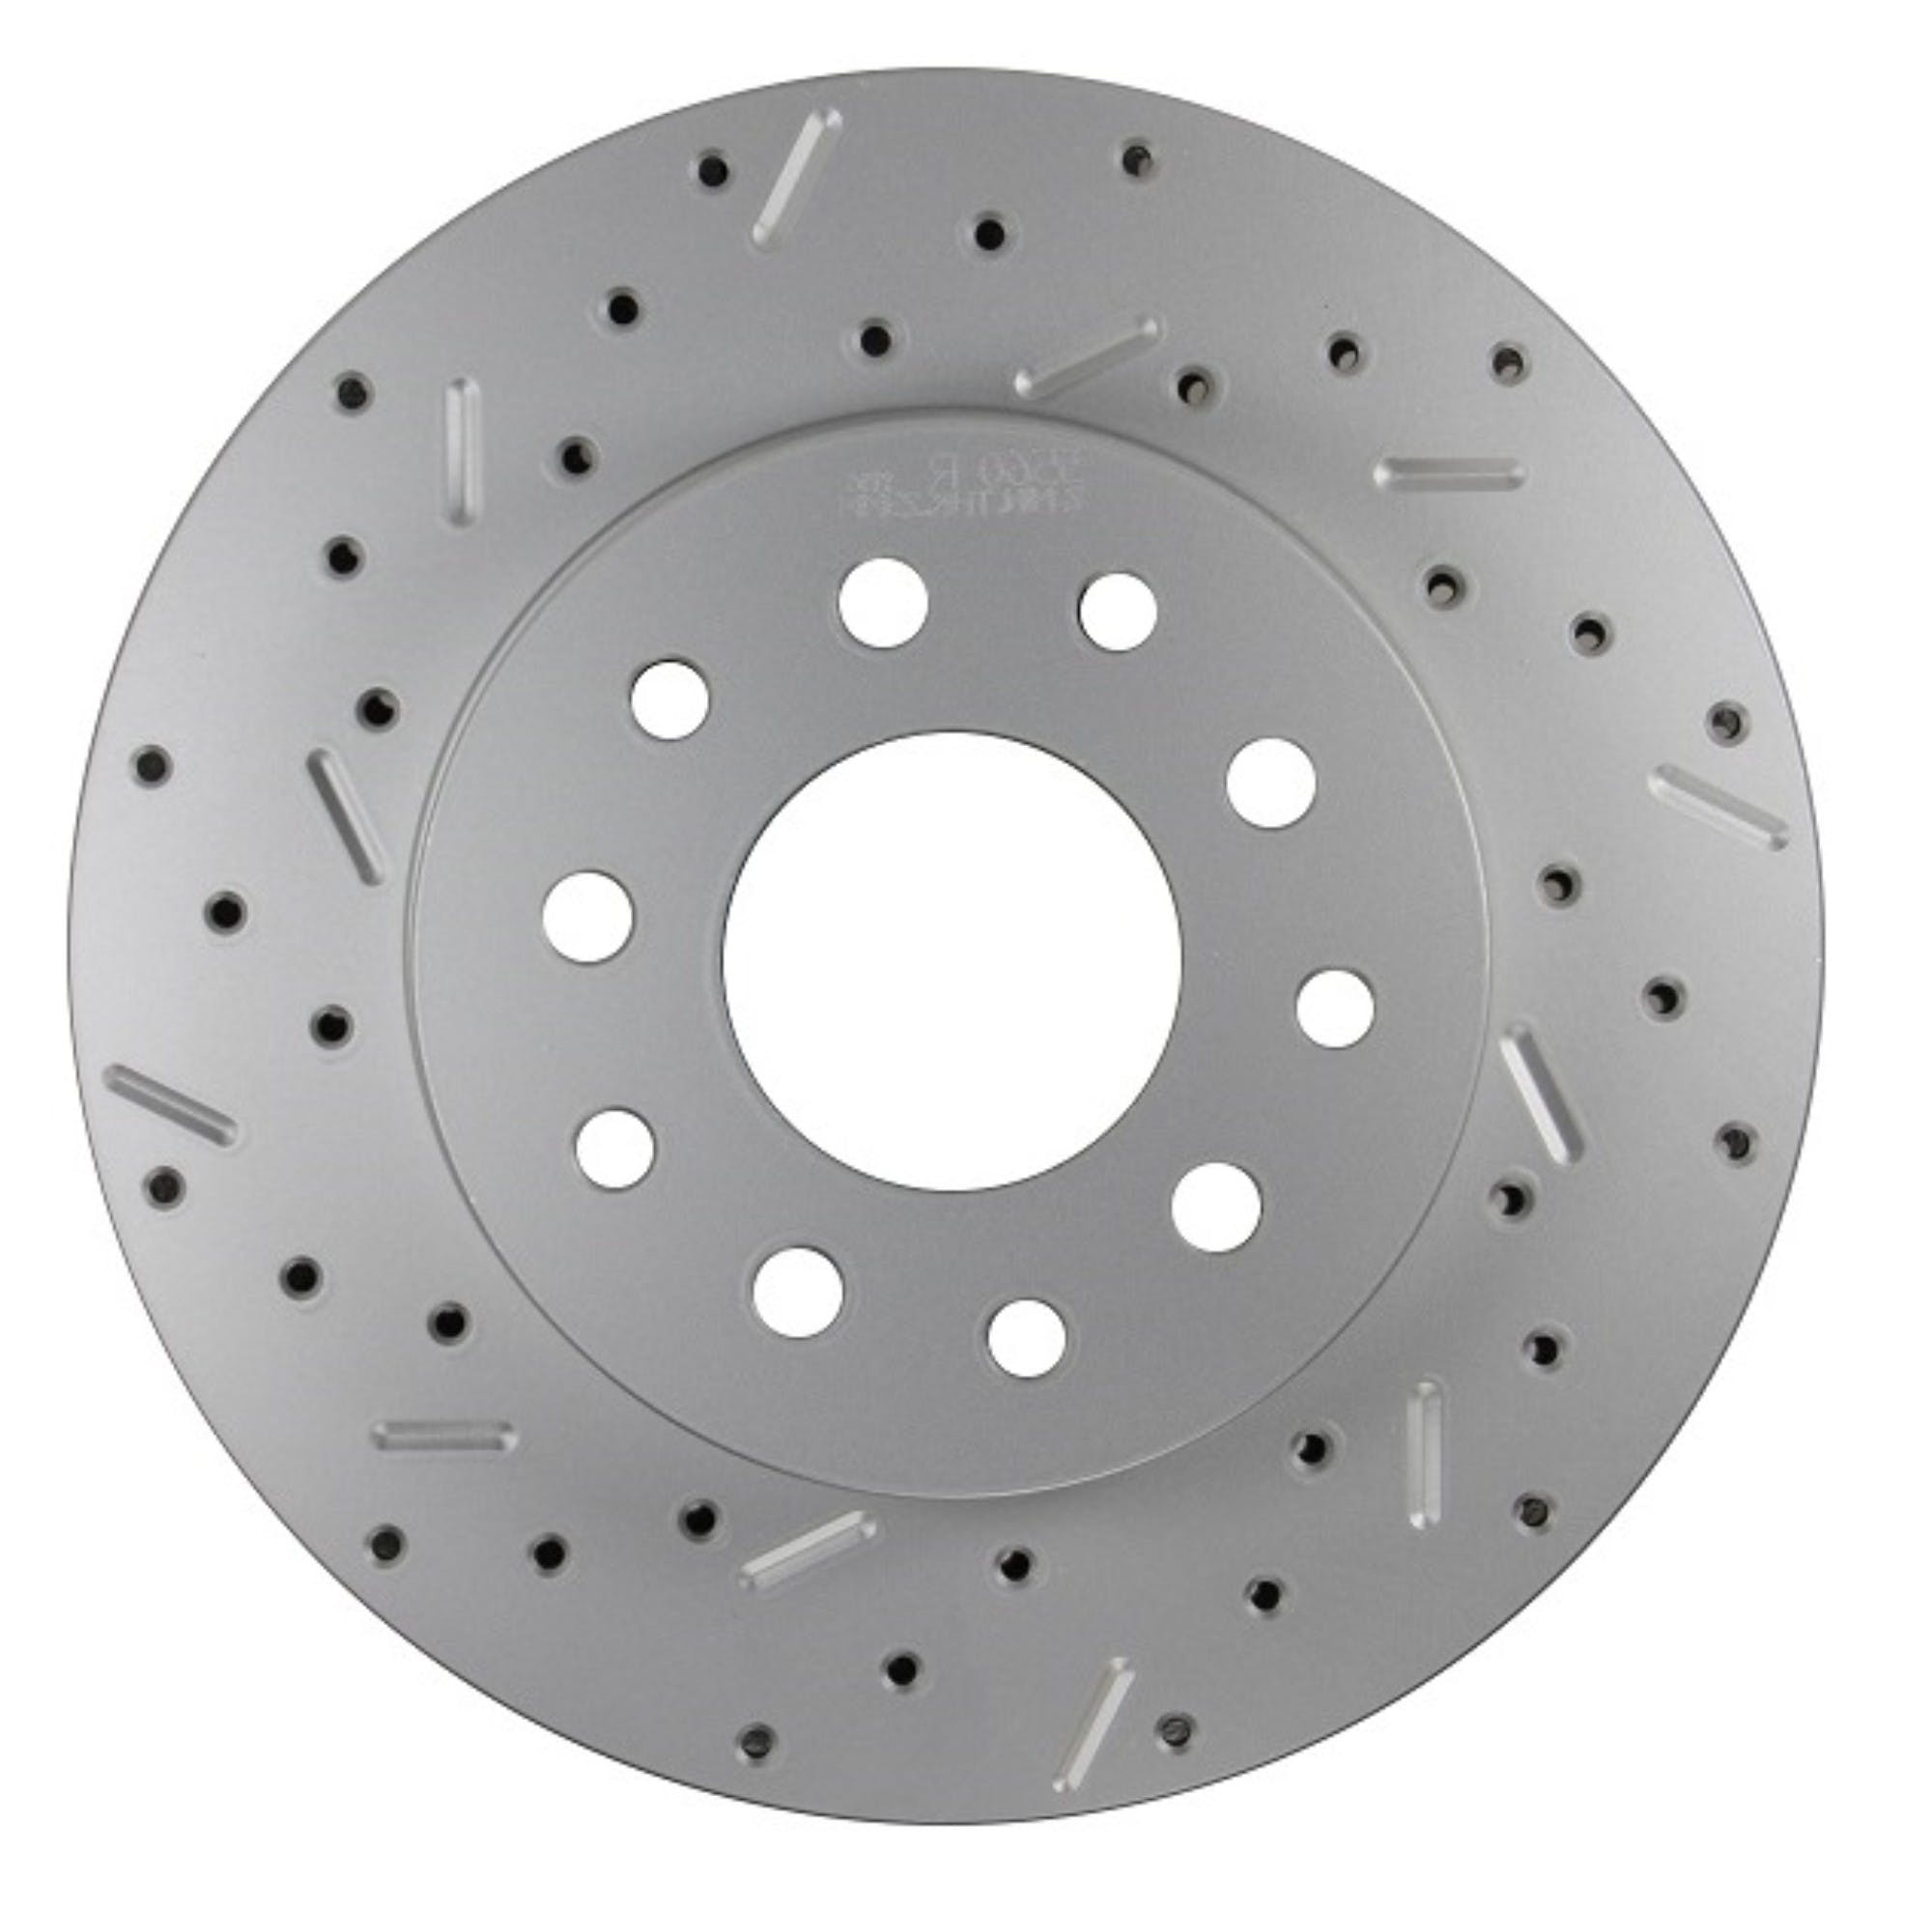 LEED Brakes 5560001LCDS Rotor Left side Cross drilled and slotted